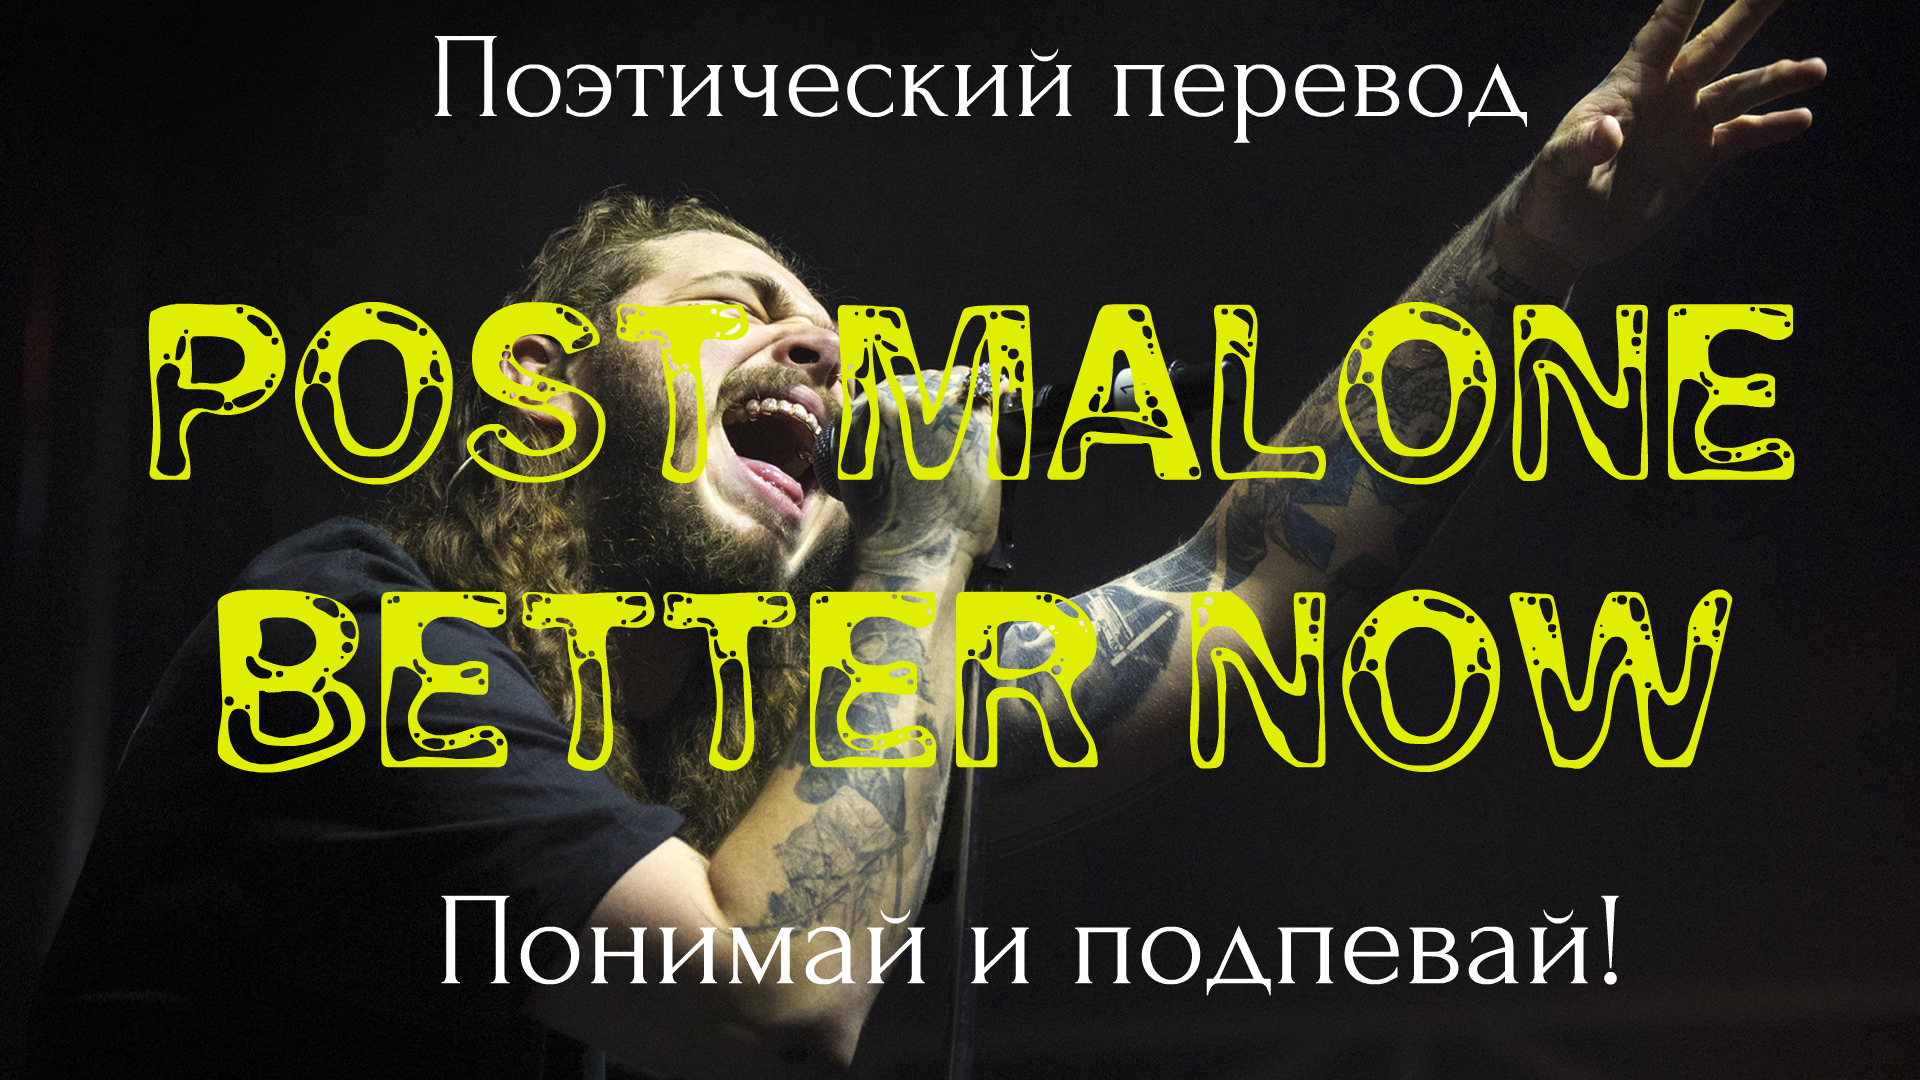 Post Malone better Now. Post Malone перевод. Post Malone перевод песни. Песня posted перевод